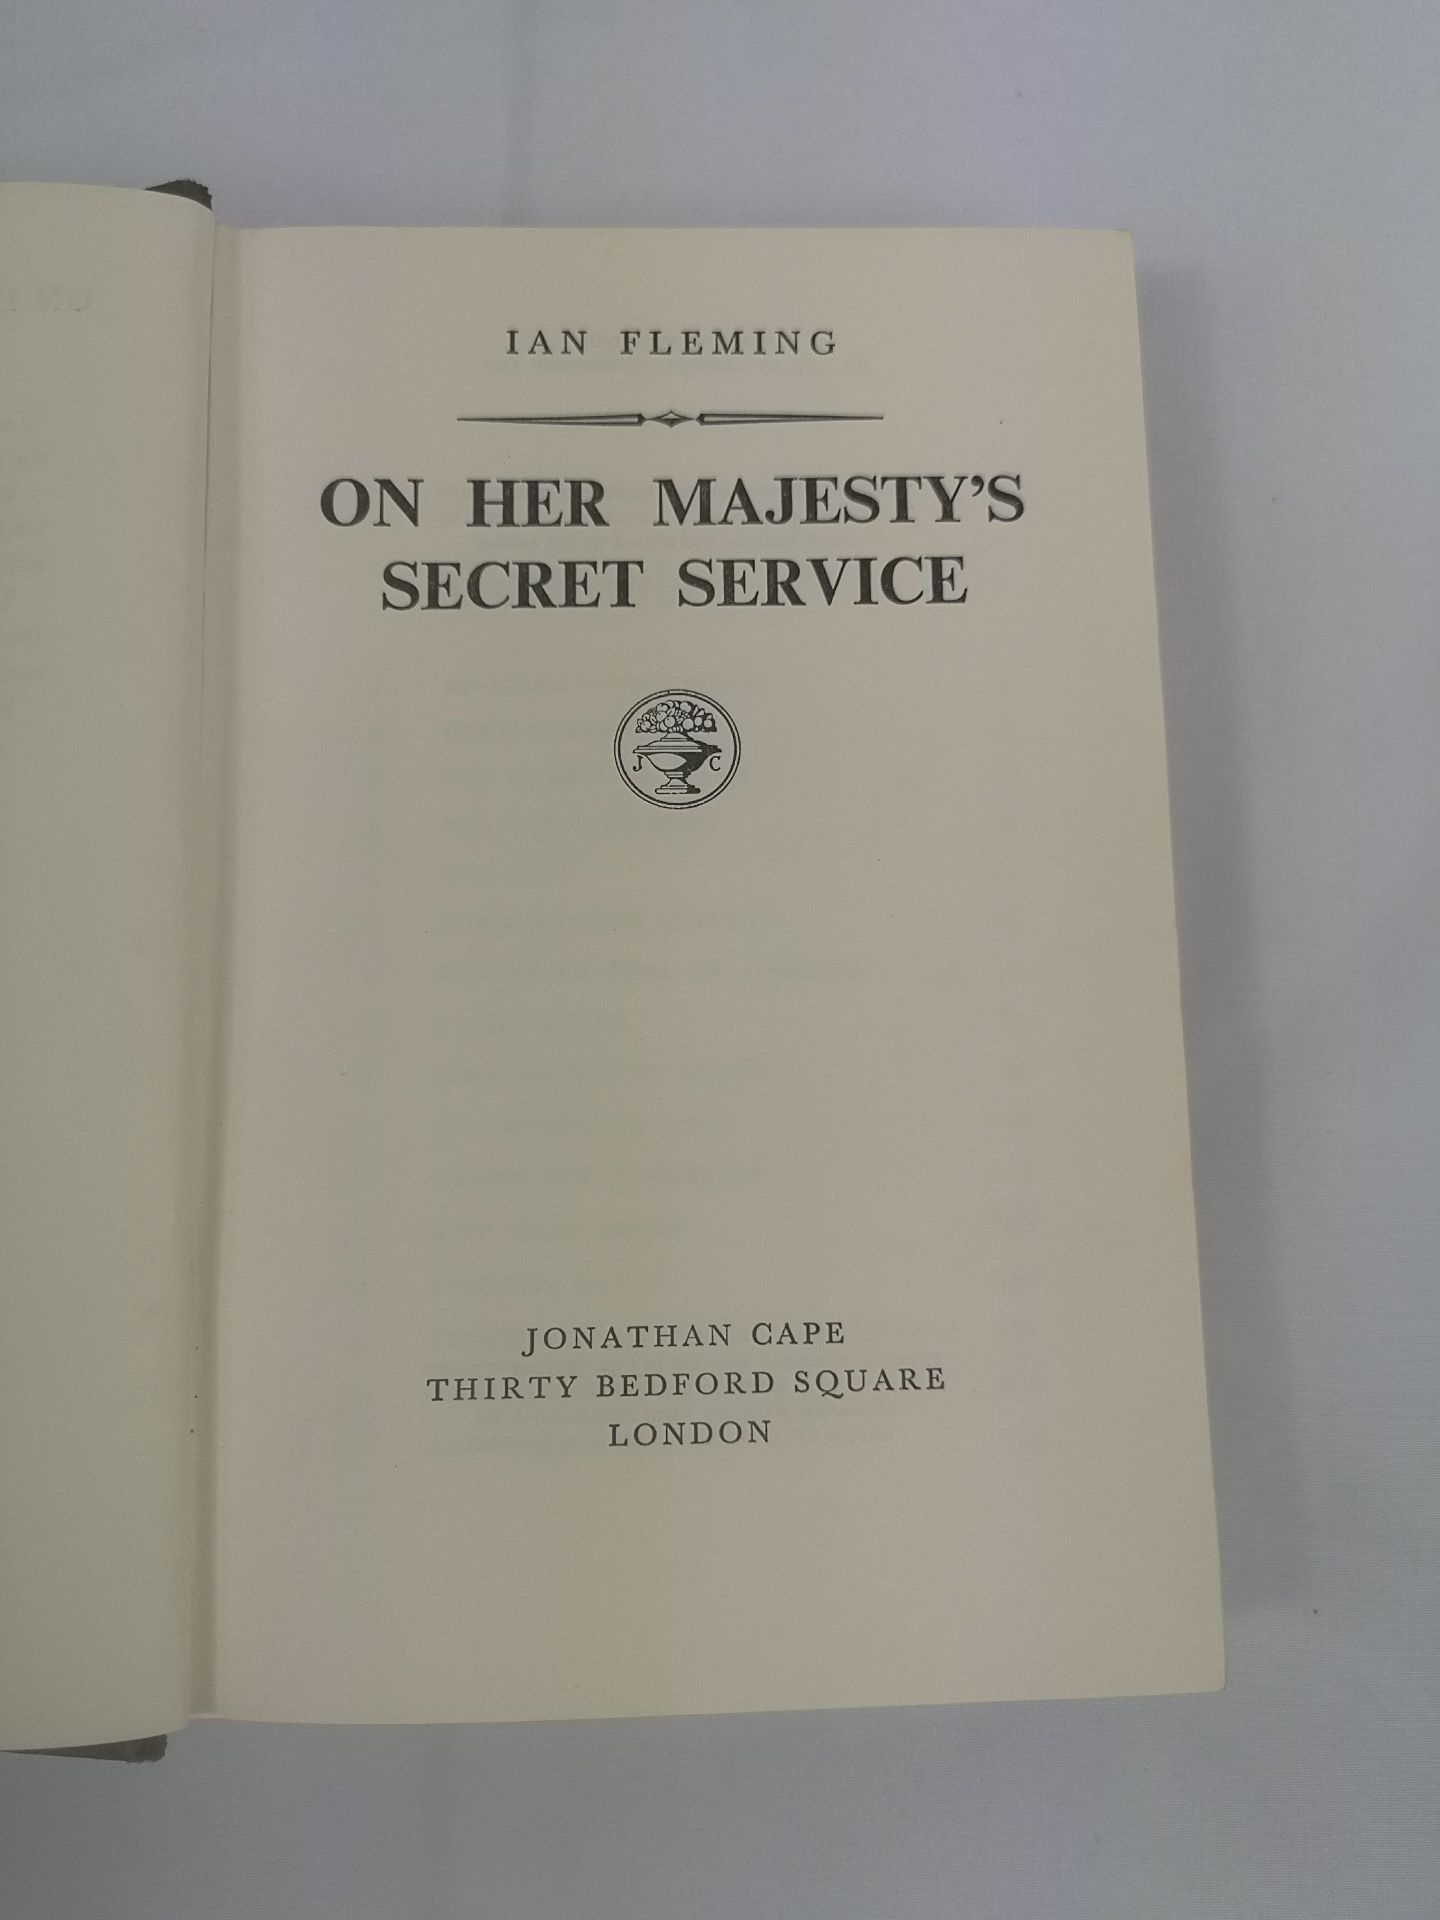 James Bond On Her Majesty's Secret Service, Ian Fleming, first edition in protective film sleeve. - Image 3 of 5